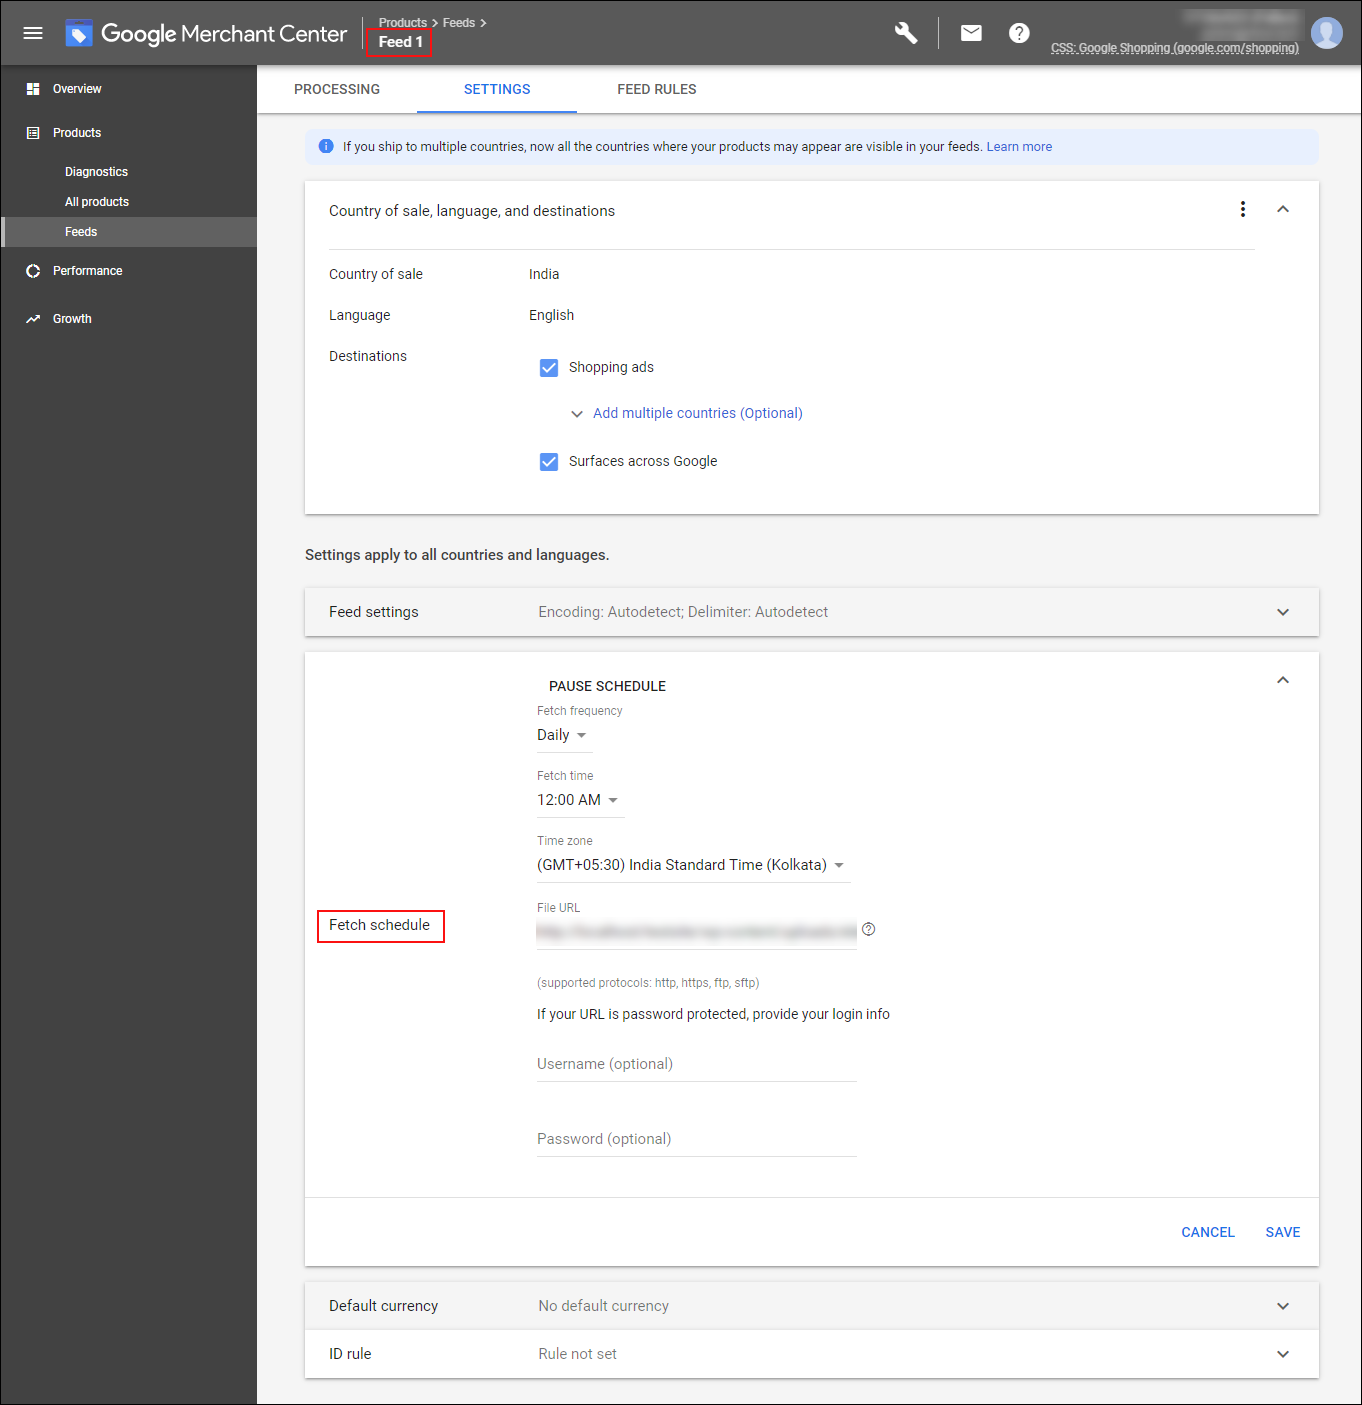  How to Submit your Google Product Feeds Via Scheduled Fetches in Google Merchant Center? | Setting up schedule fetch details